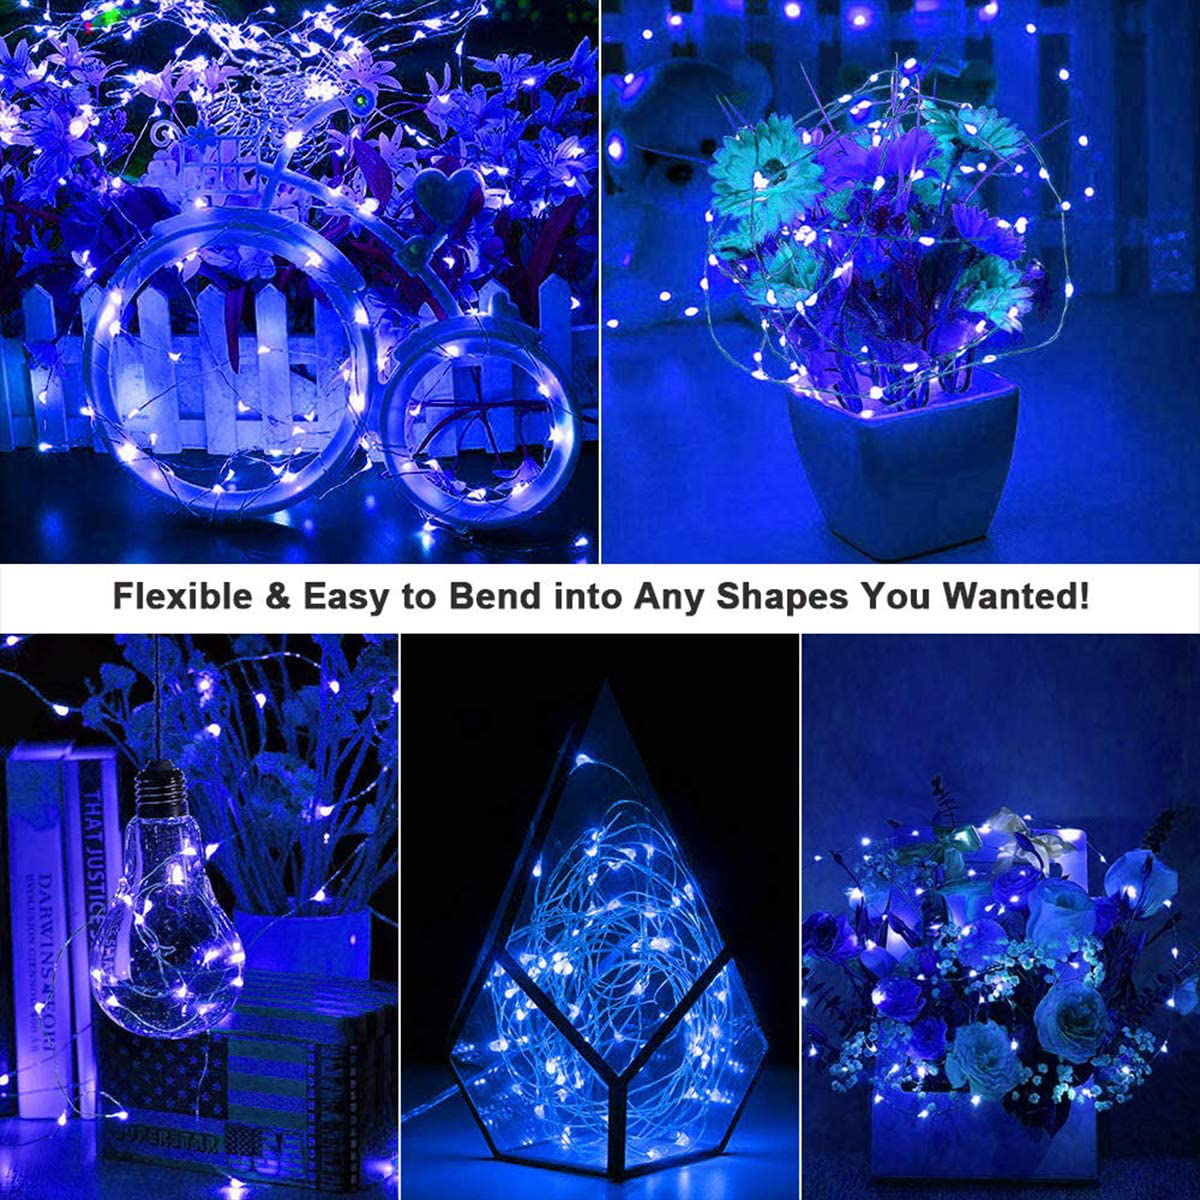 Ariceleo Led Fairy Lights Battery Operated, 2 Packs Mini Battery Powered Copper Wire Starry Fairy Lights for Bedroom, Christmas, Parties, Wedding, Centerpiece, Decoration (5m/16ft Cool White)